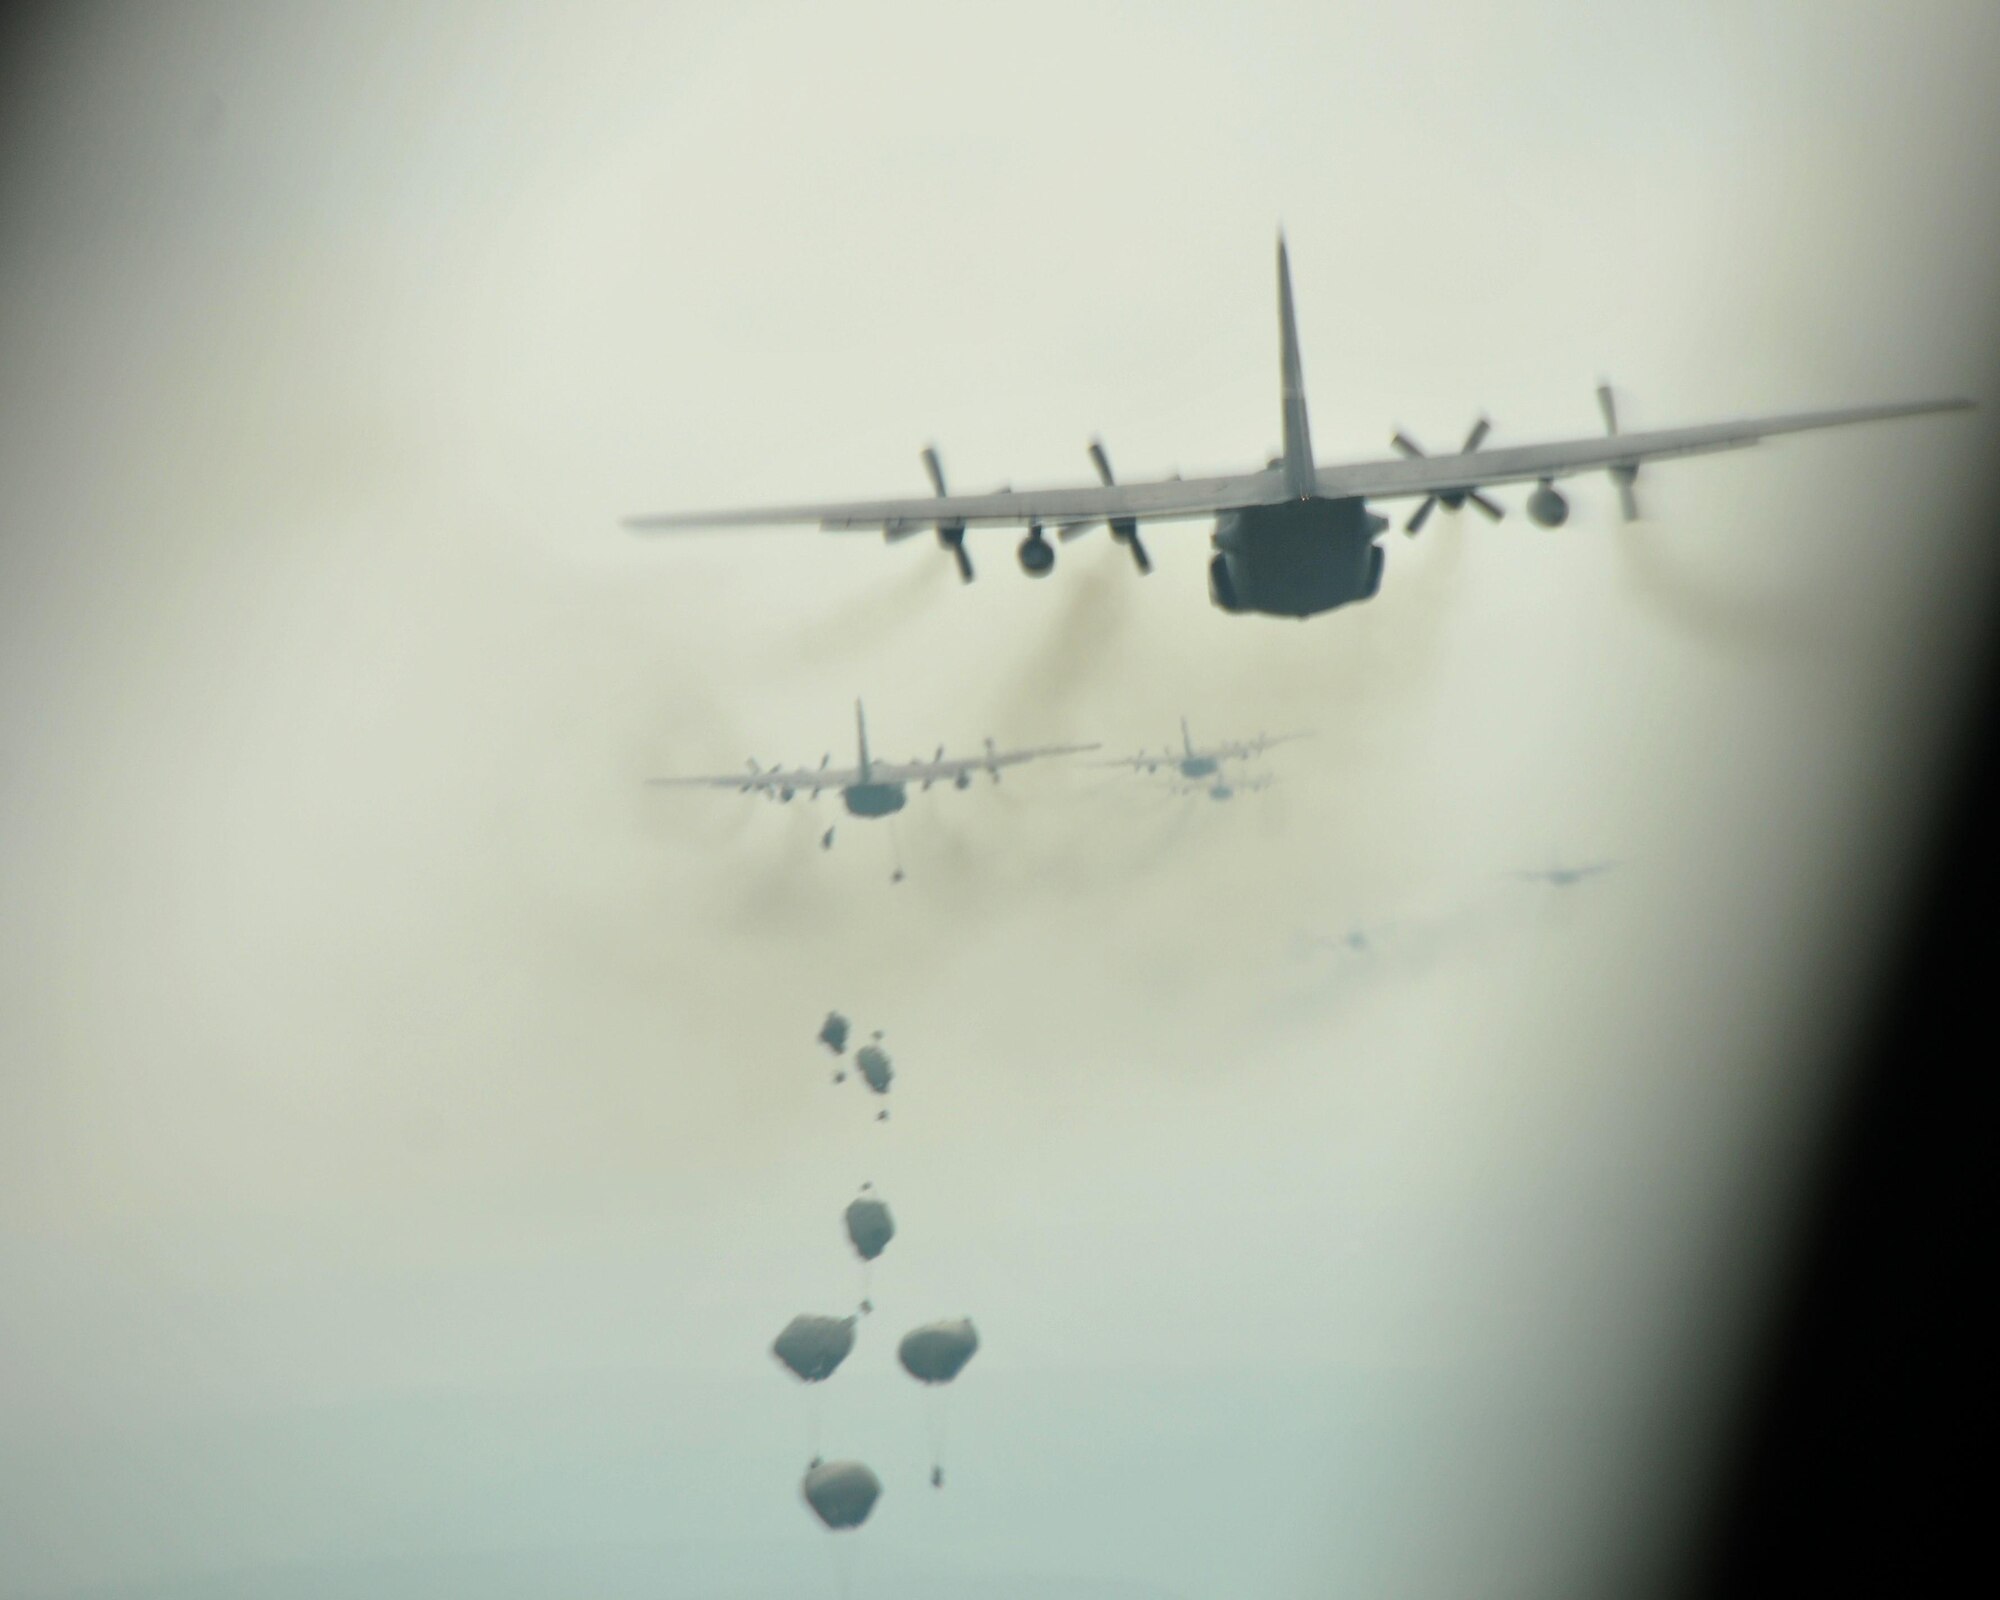 Paratroopers deploy their parachutes over Hohenfels Training Area, Germany on April 12, 2016. The 94th Airlift Wing participated in Exercise Saber Junction 16 April 11-15. (U.S. Air Force photo/ Senior Airman Andrew J. Park)
